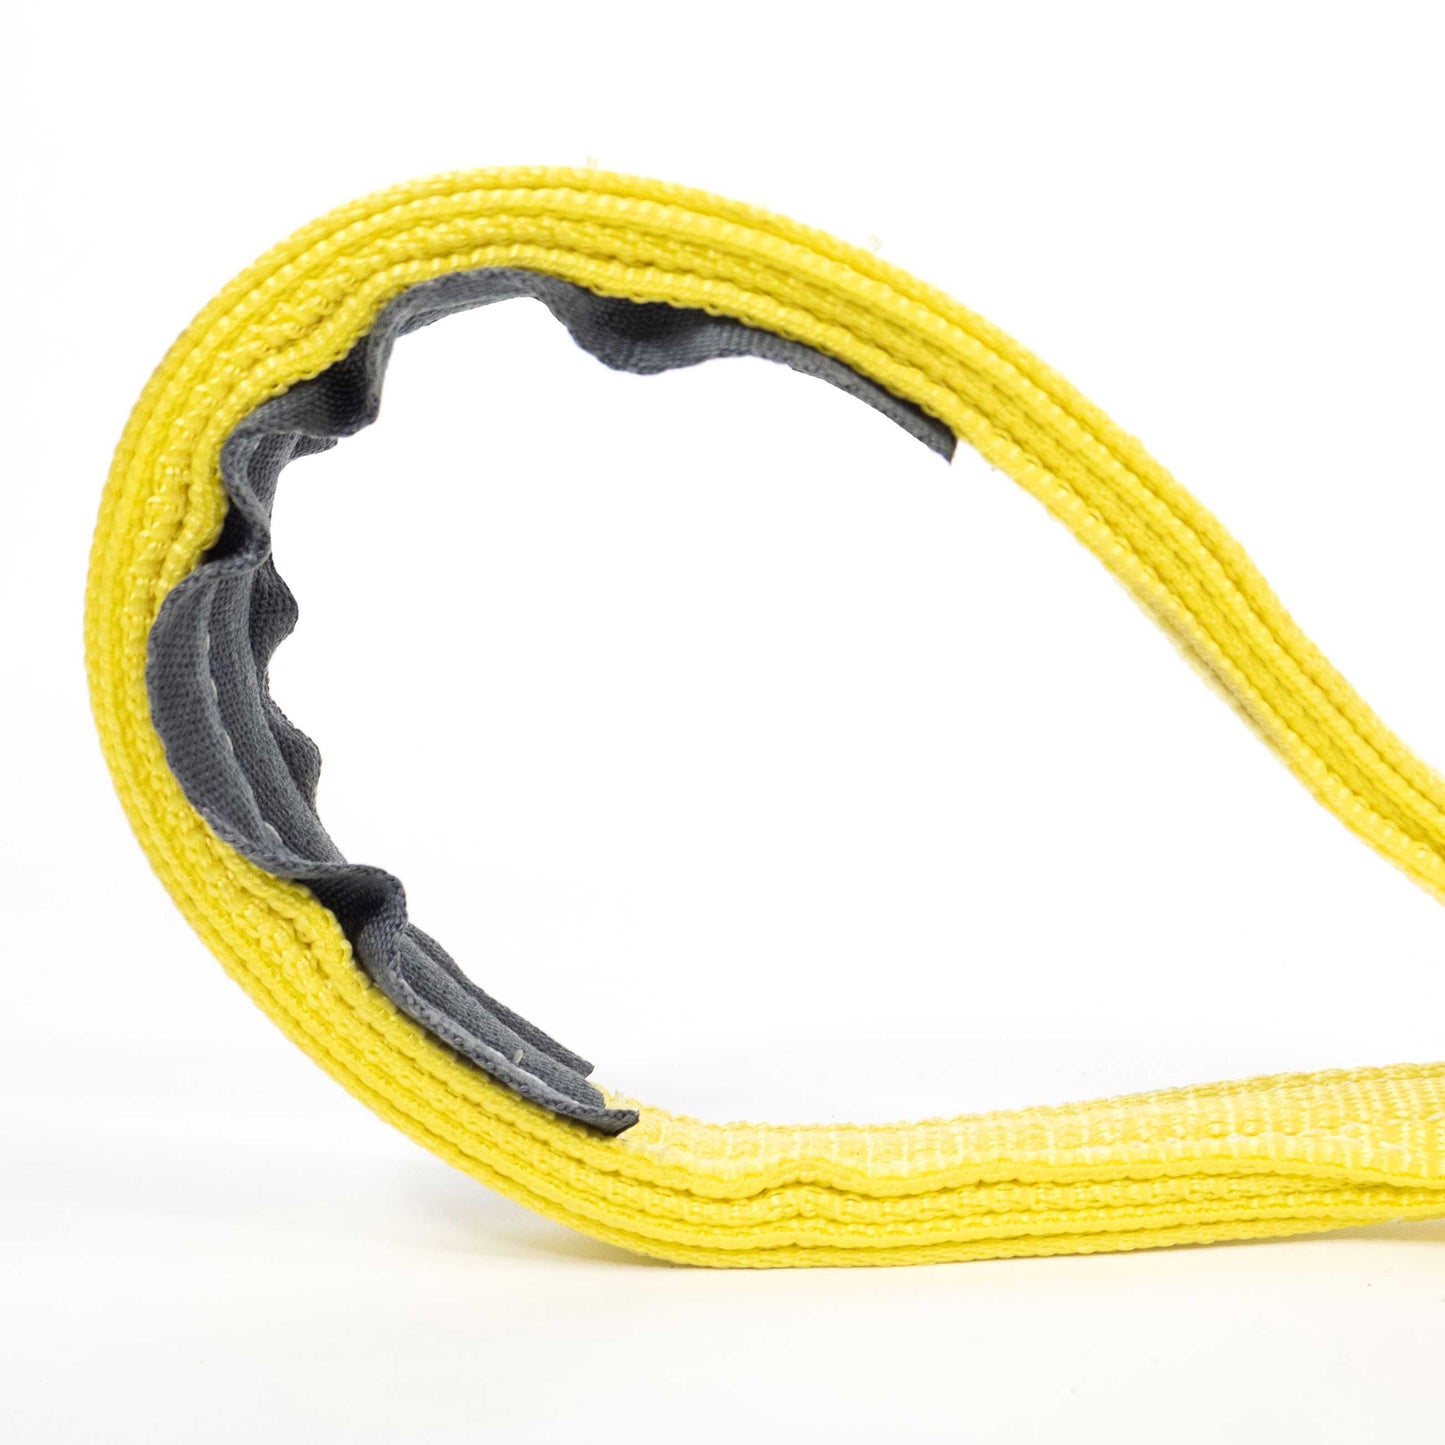 3" x 20' Heavy Duty Recovery Strap with Reinforced Cordura Eyes - 3 Ply | 30,750 WLL